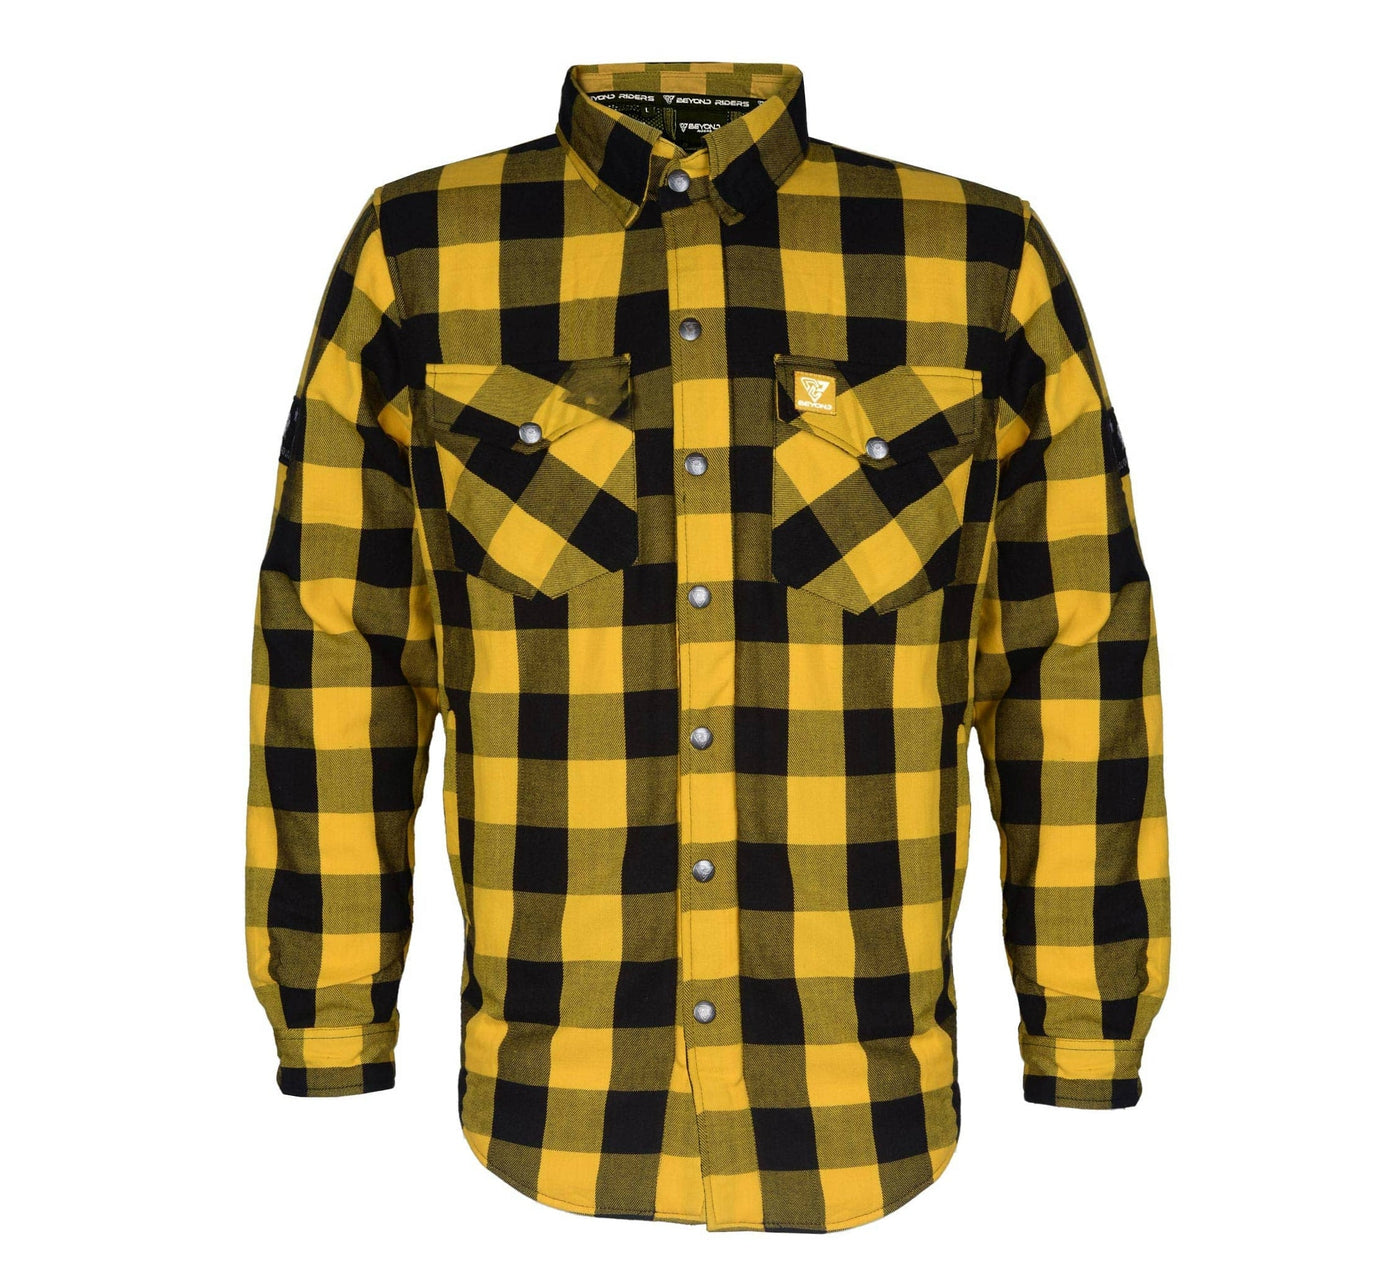 Protective Flannel Shirt with Pads "Blaze of Glory" - Yellow and Black Checkered